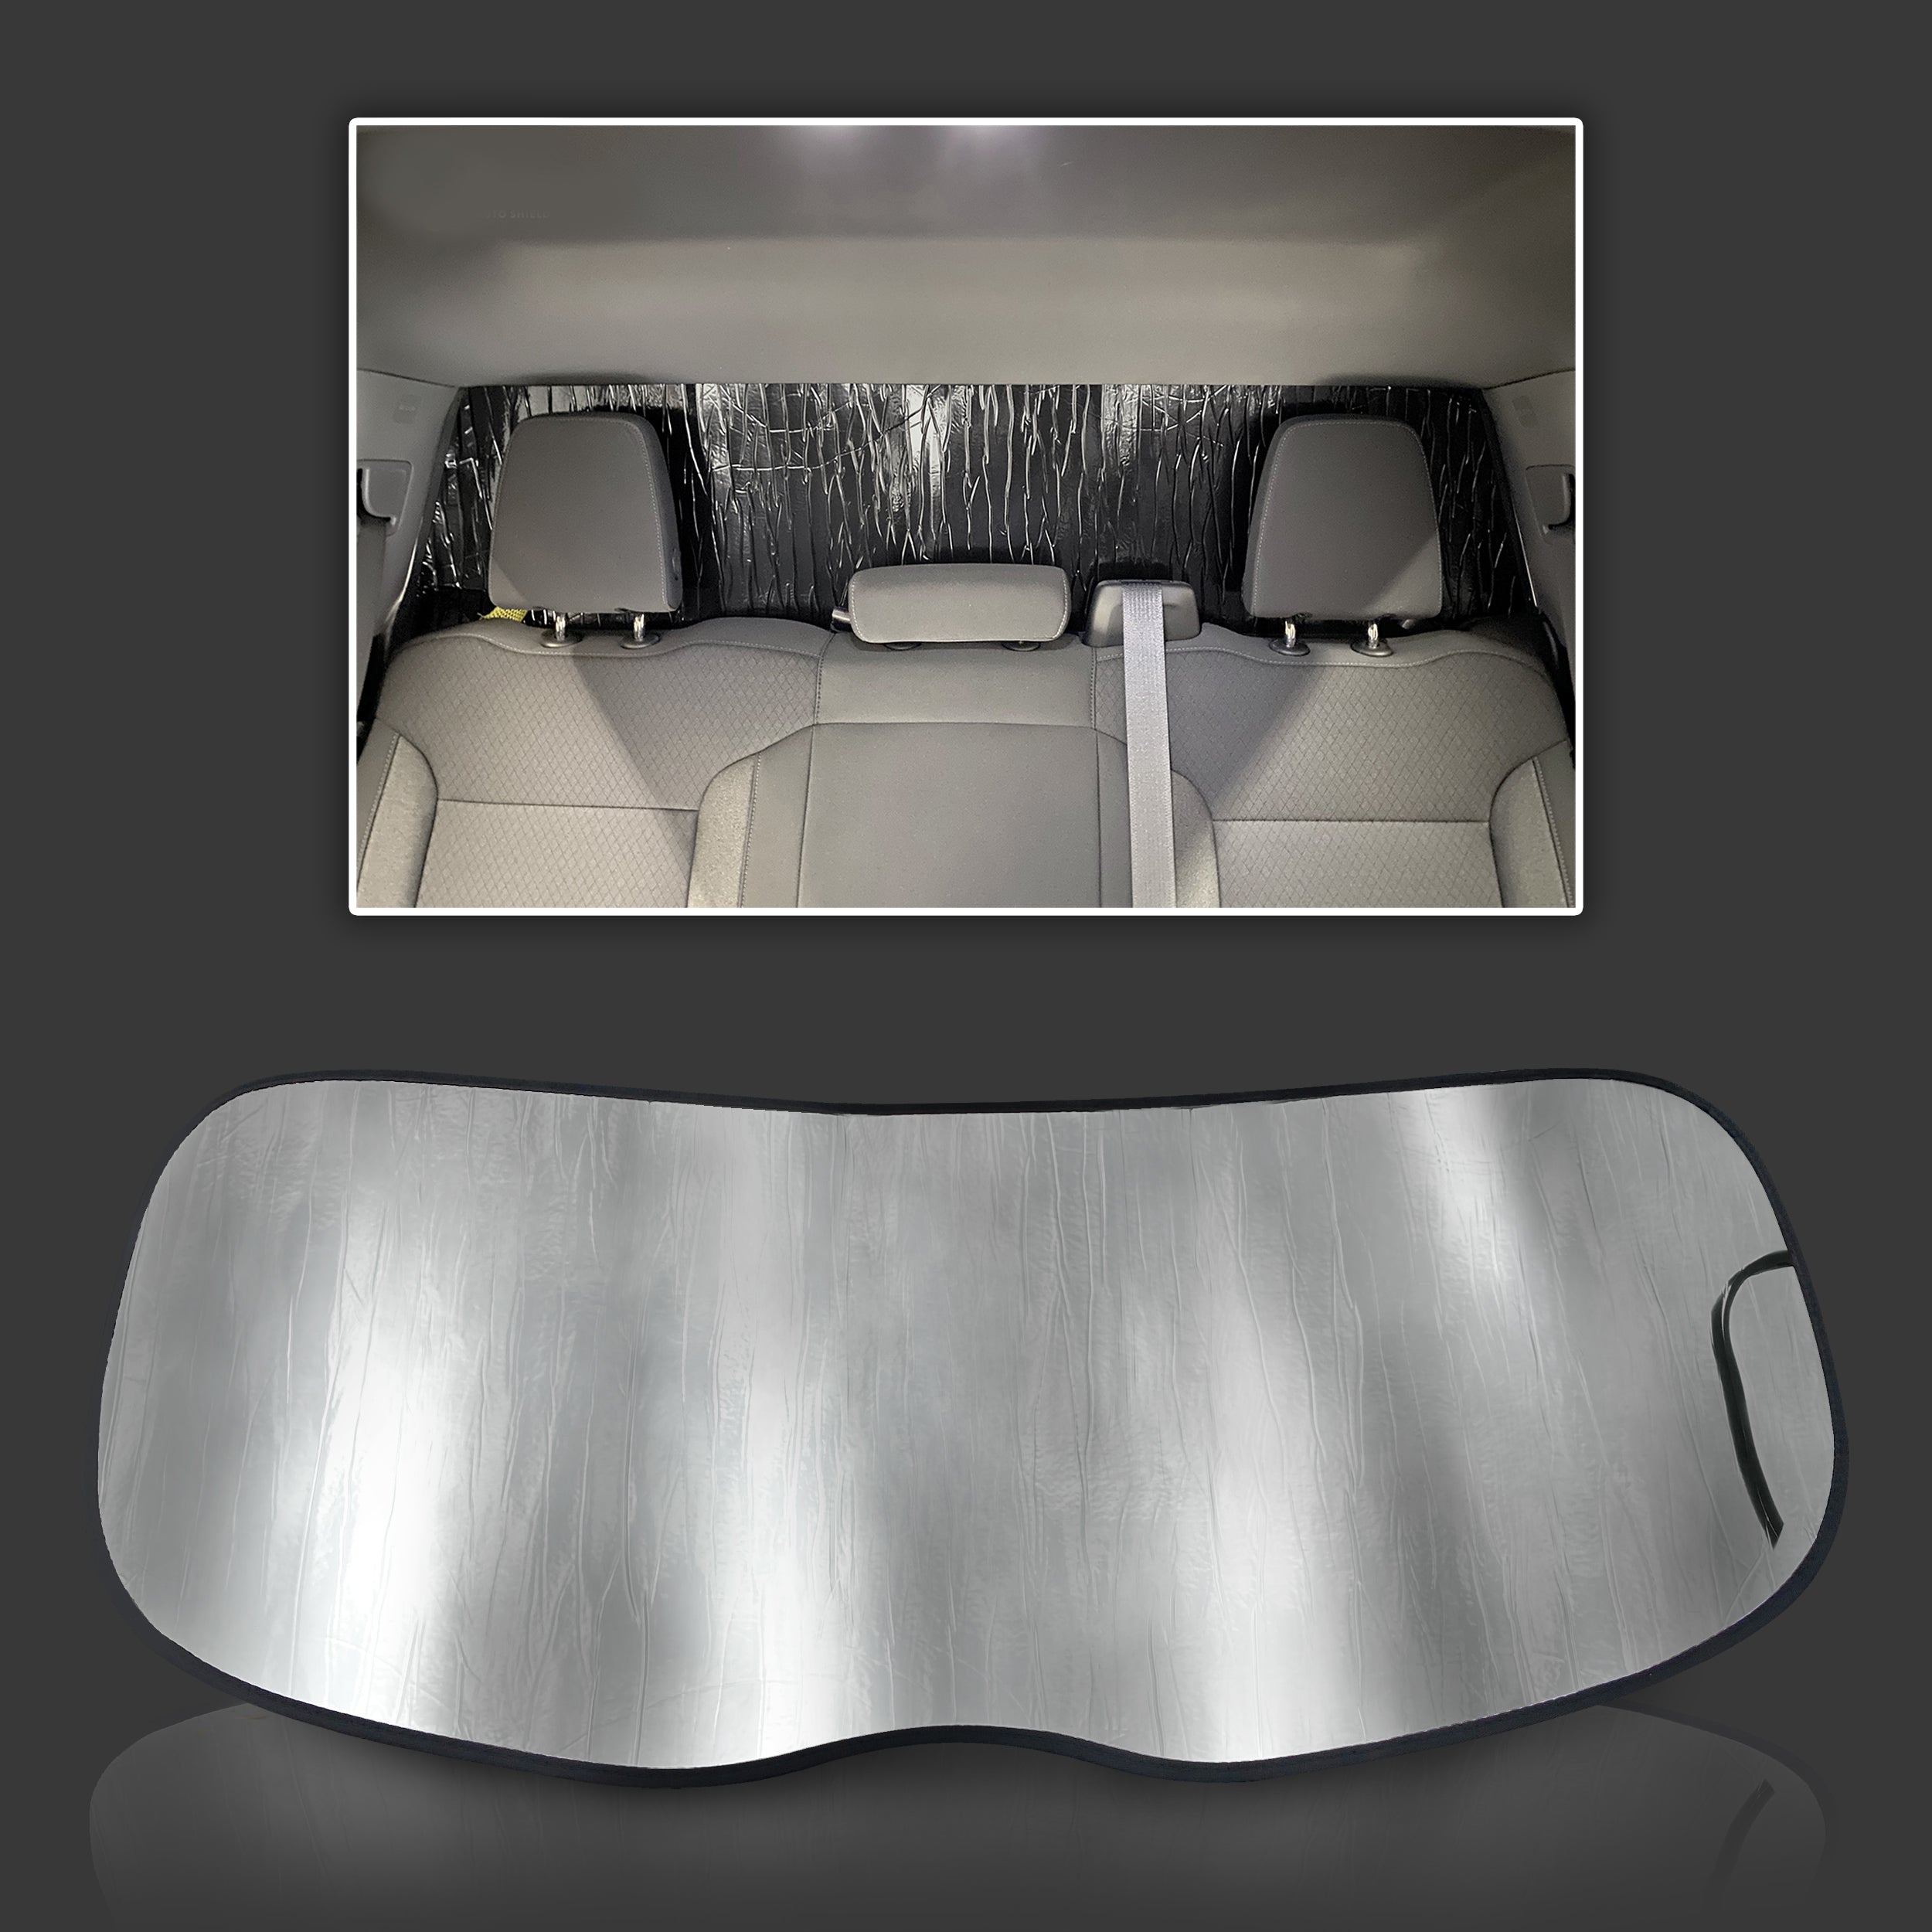 Sunshades for 2019-2024 Chevrolet Silverado 1500 Pickup (View for more options)